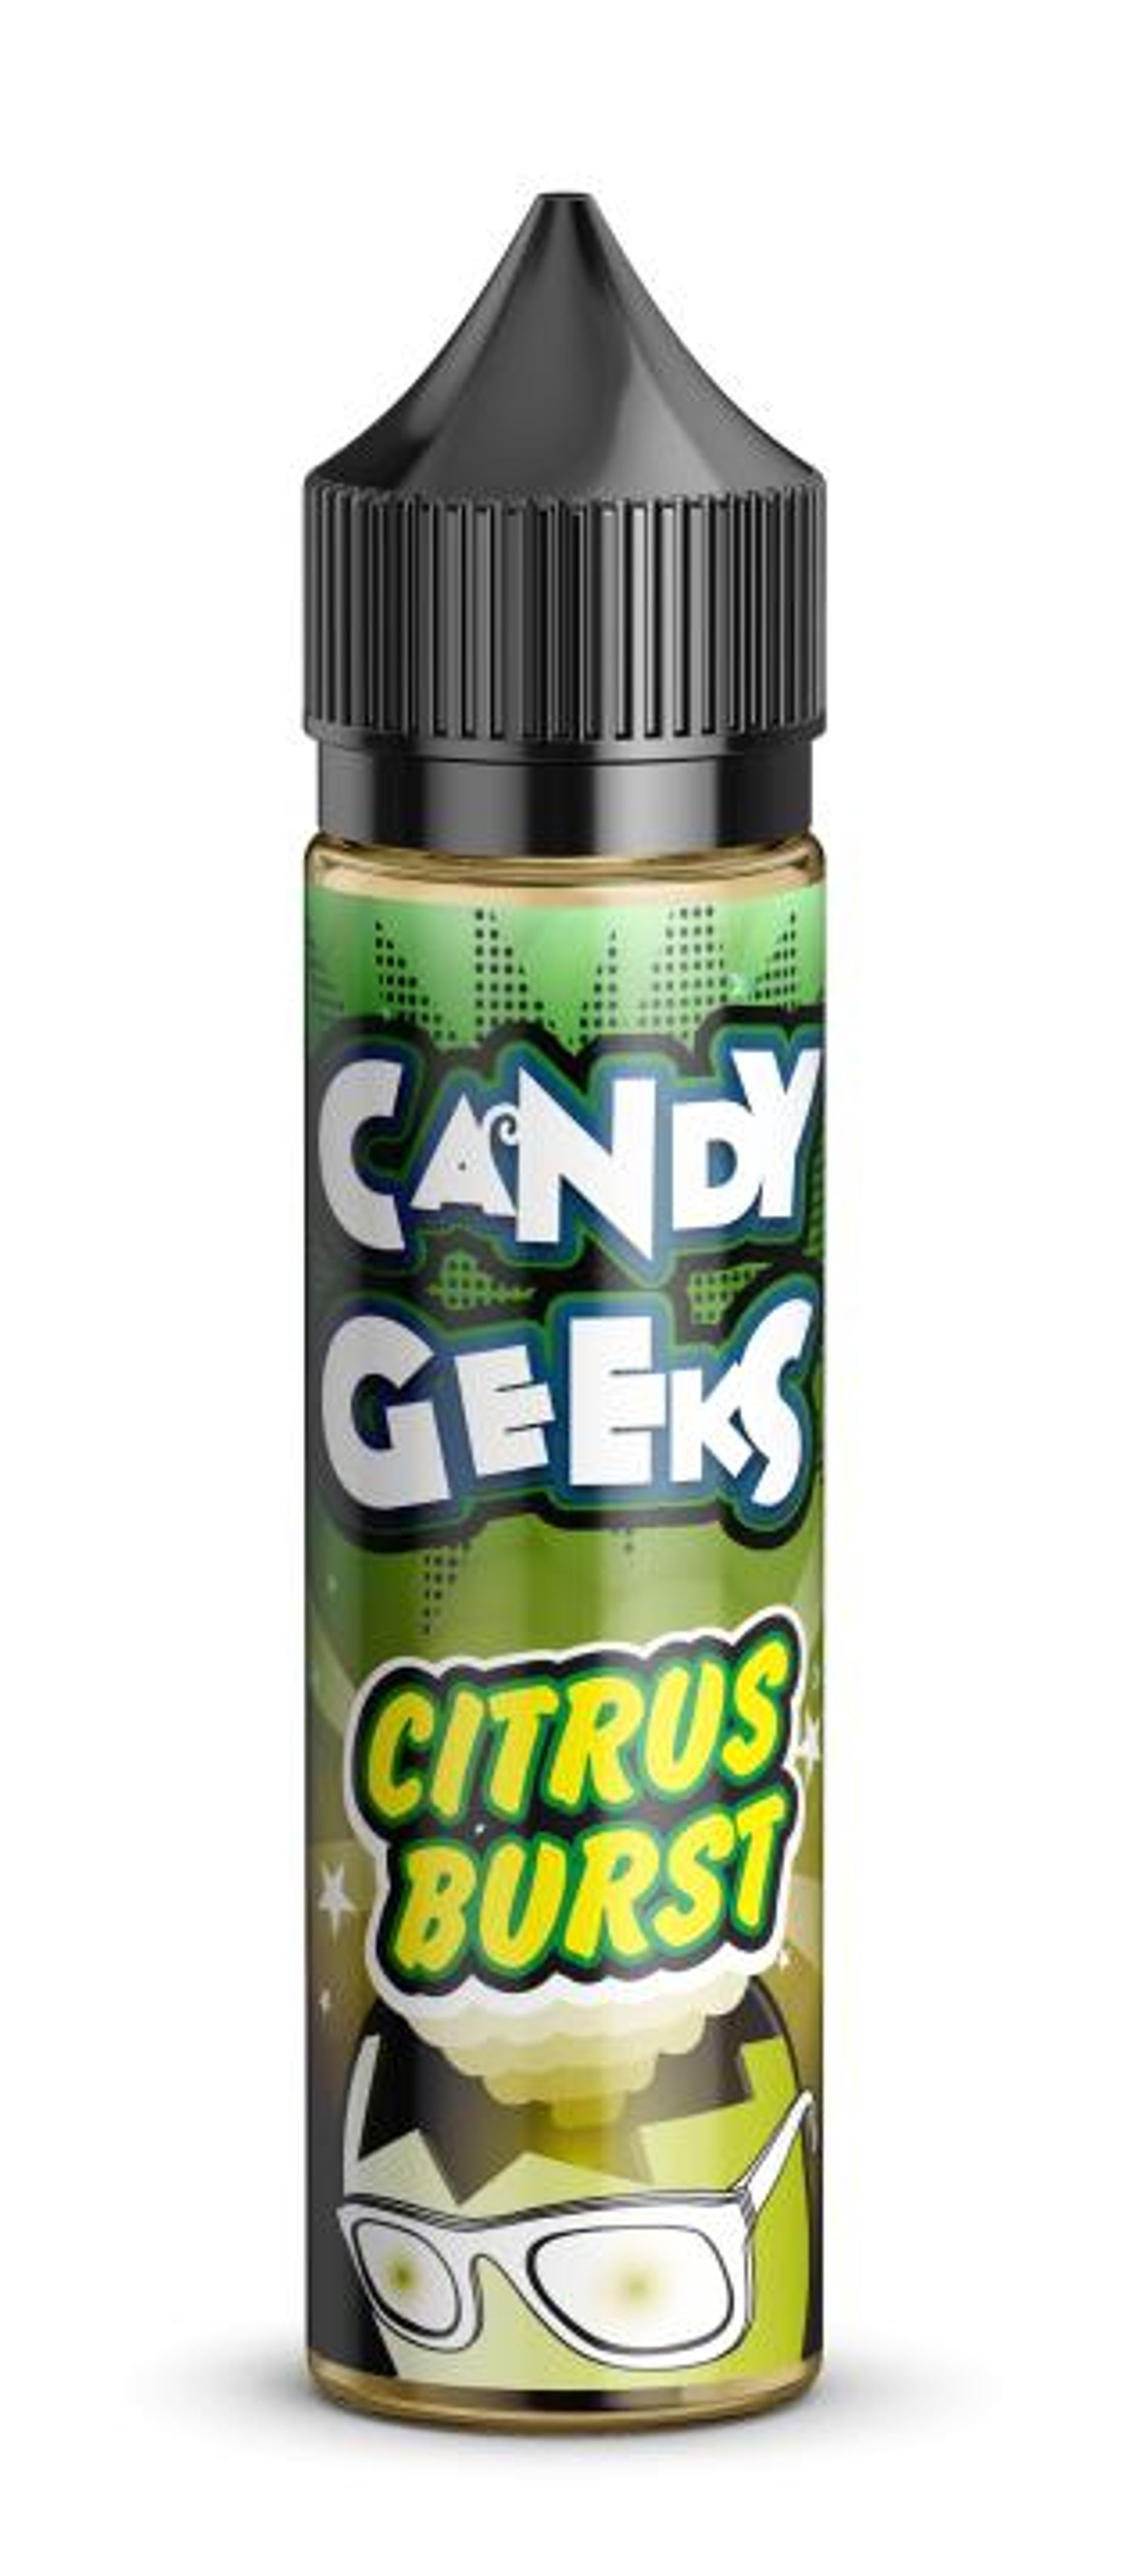 Image of Citrus Burst by Candy Geeks